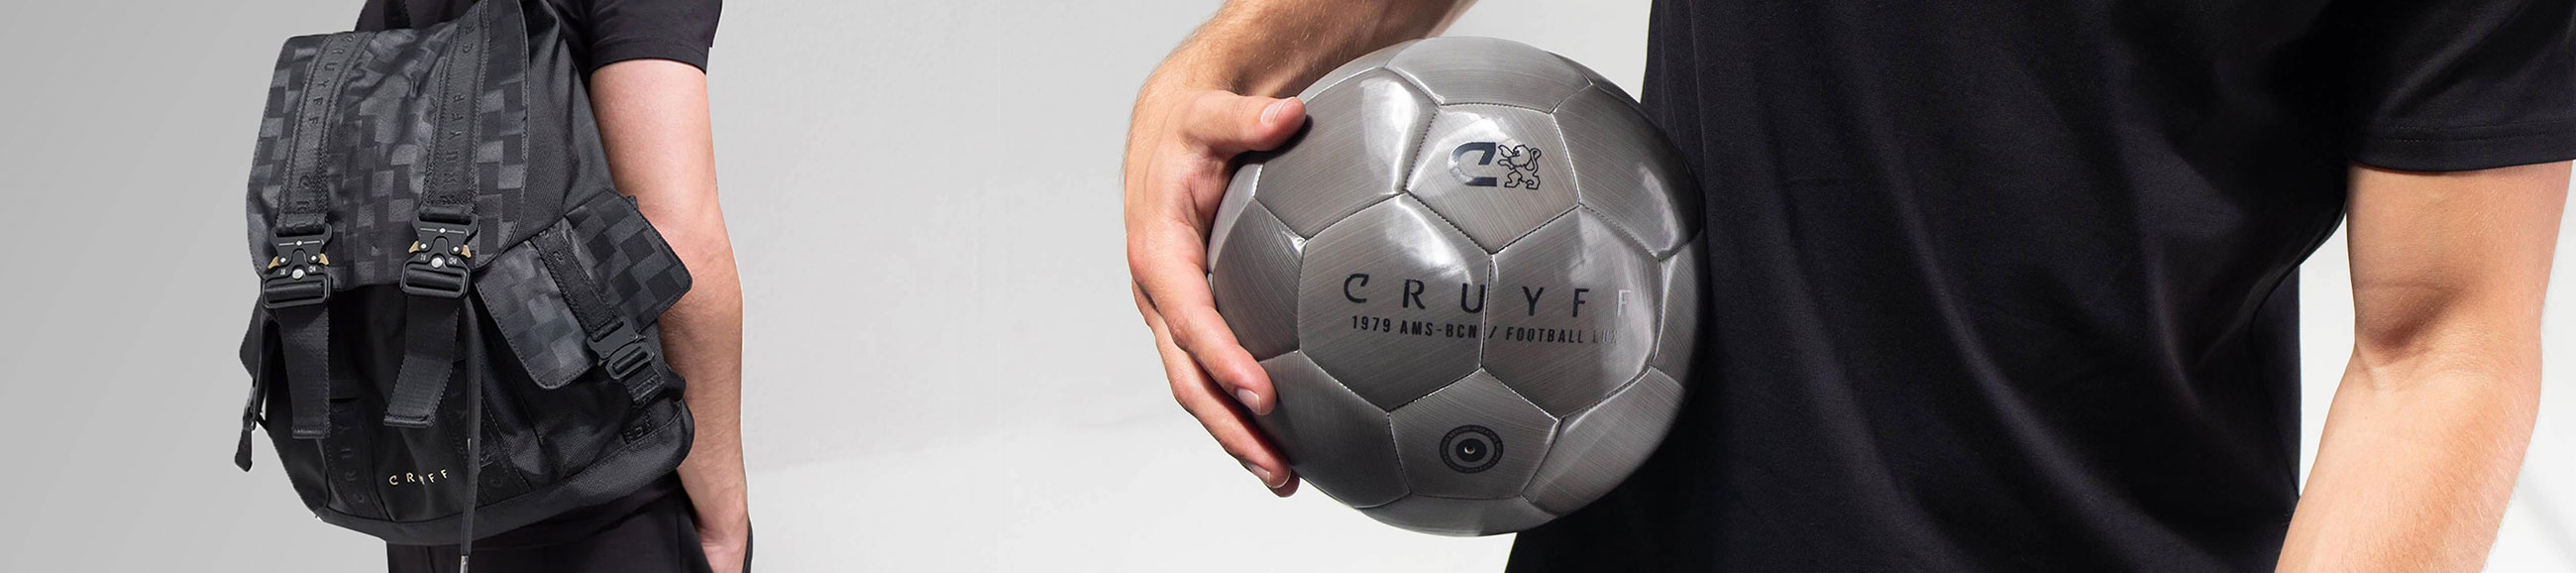 Explore the entire accessories collection Cruyff. ✓ Secured payment methods ✓ Fast worldwide delivery